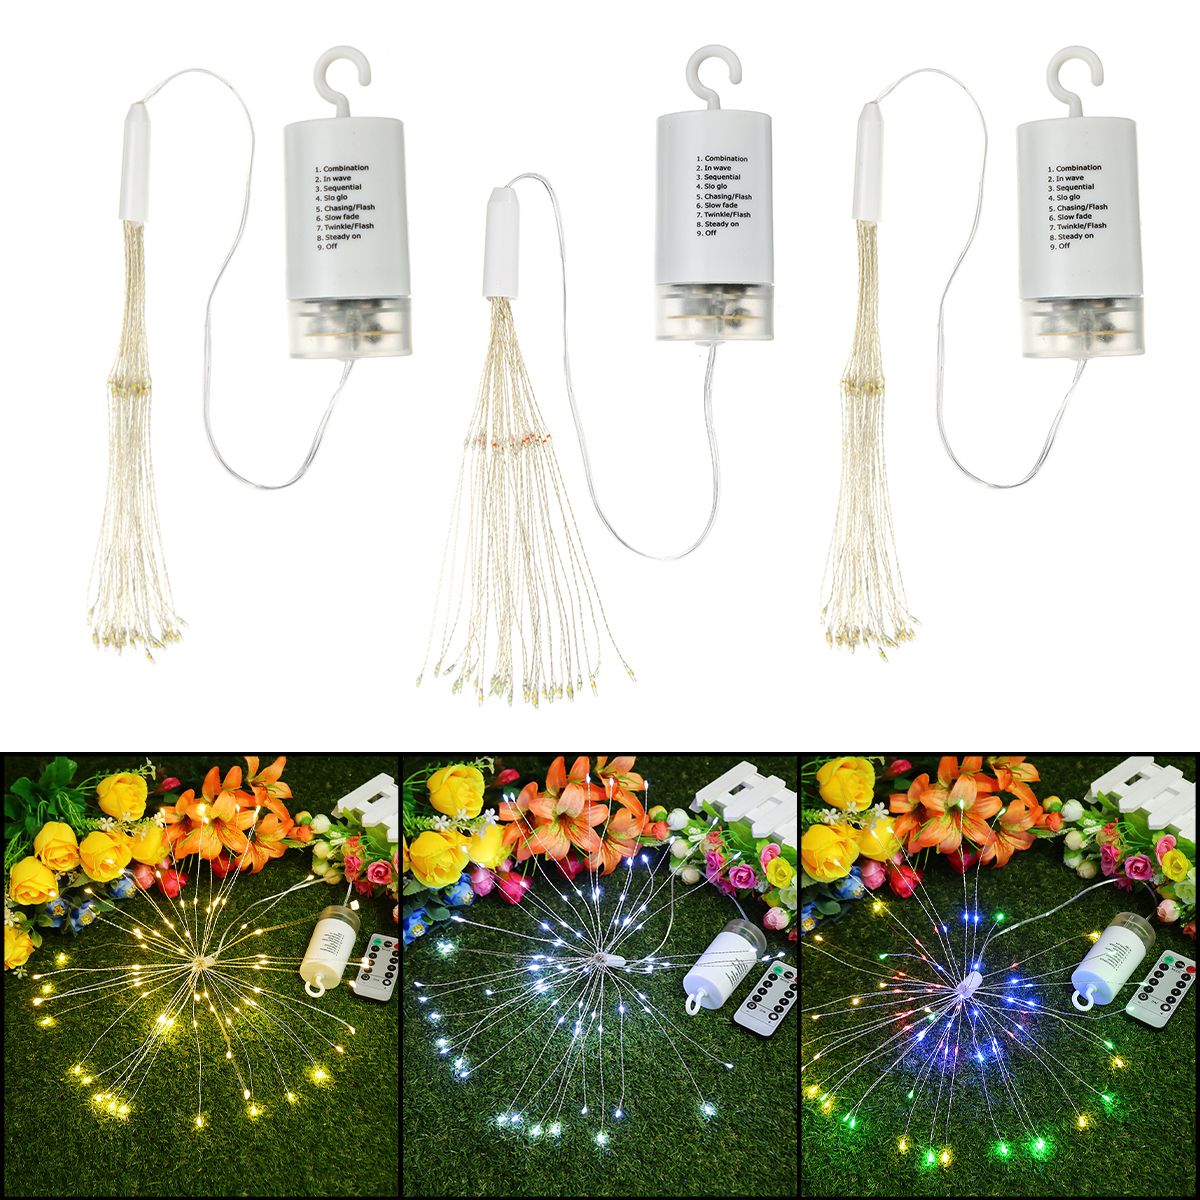 Hanging-LED-Firework-Fairy-String-Light-8Modes-Remote-Home-Party-Wedding-Decor-1691619